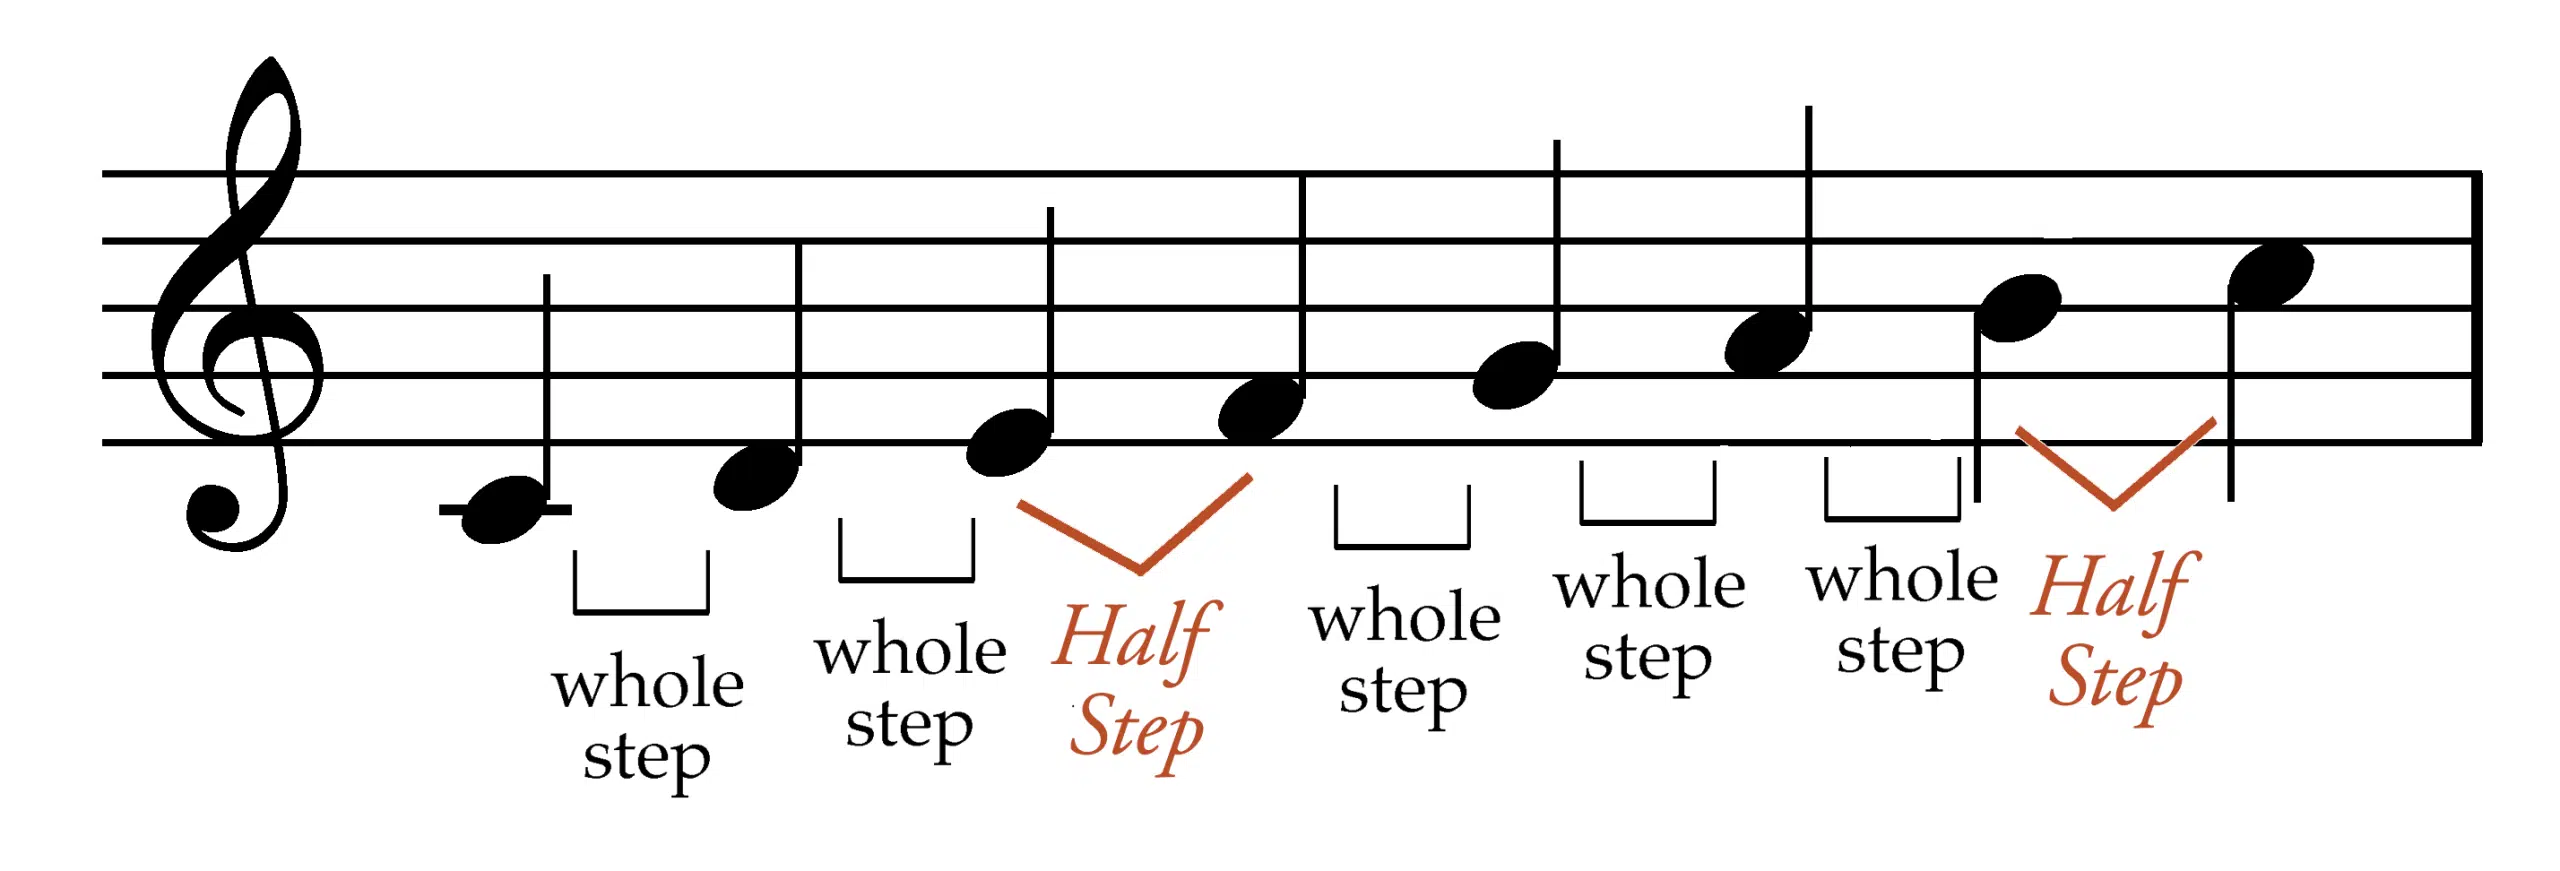 Major Scale Whole and Half Steps - Unison